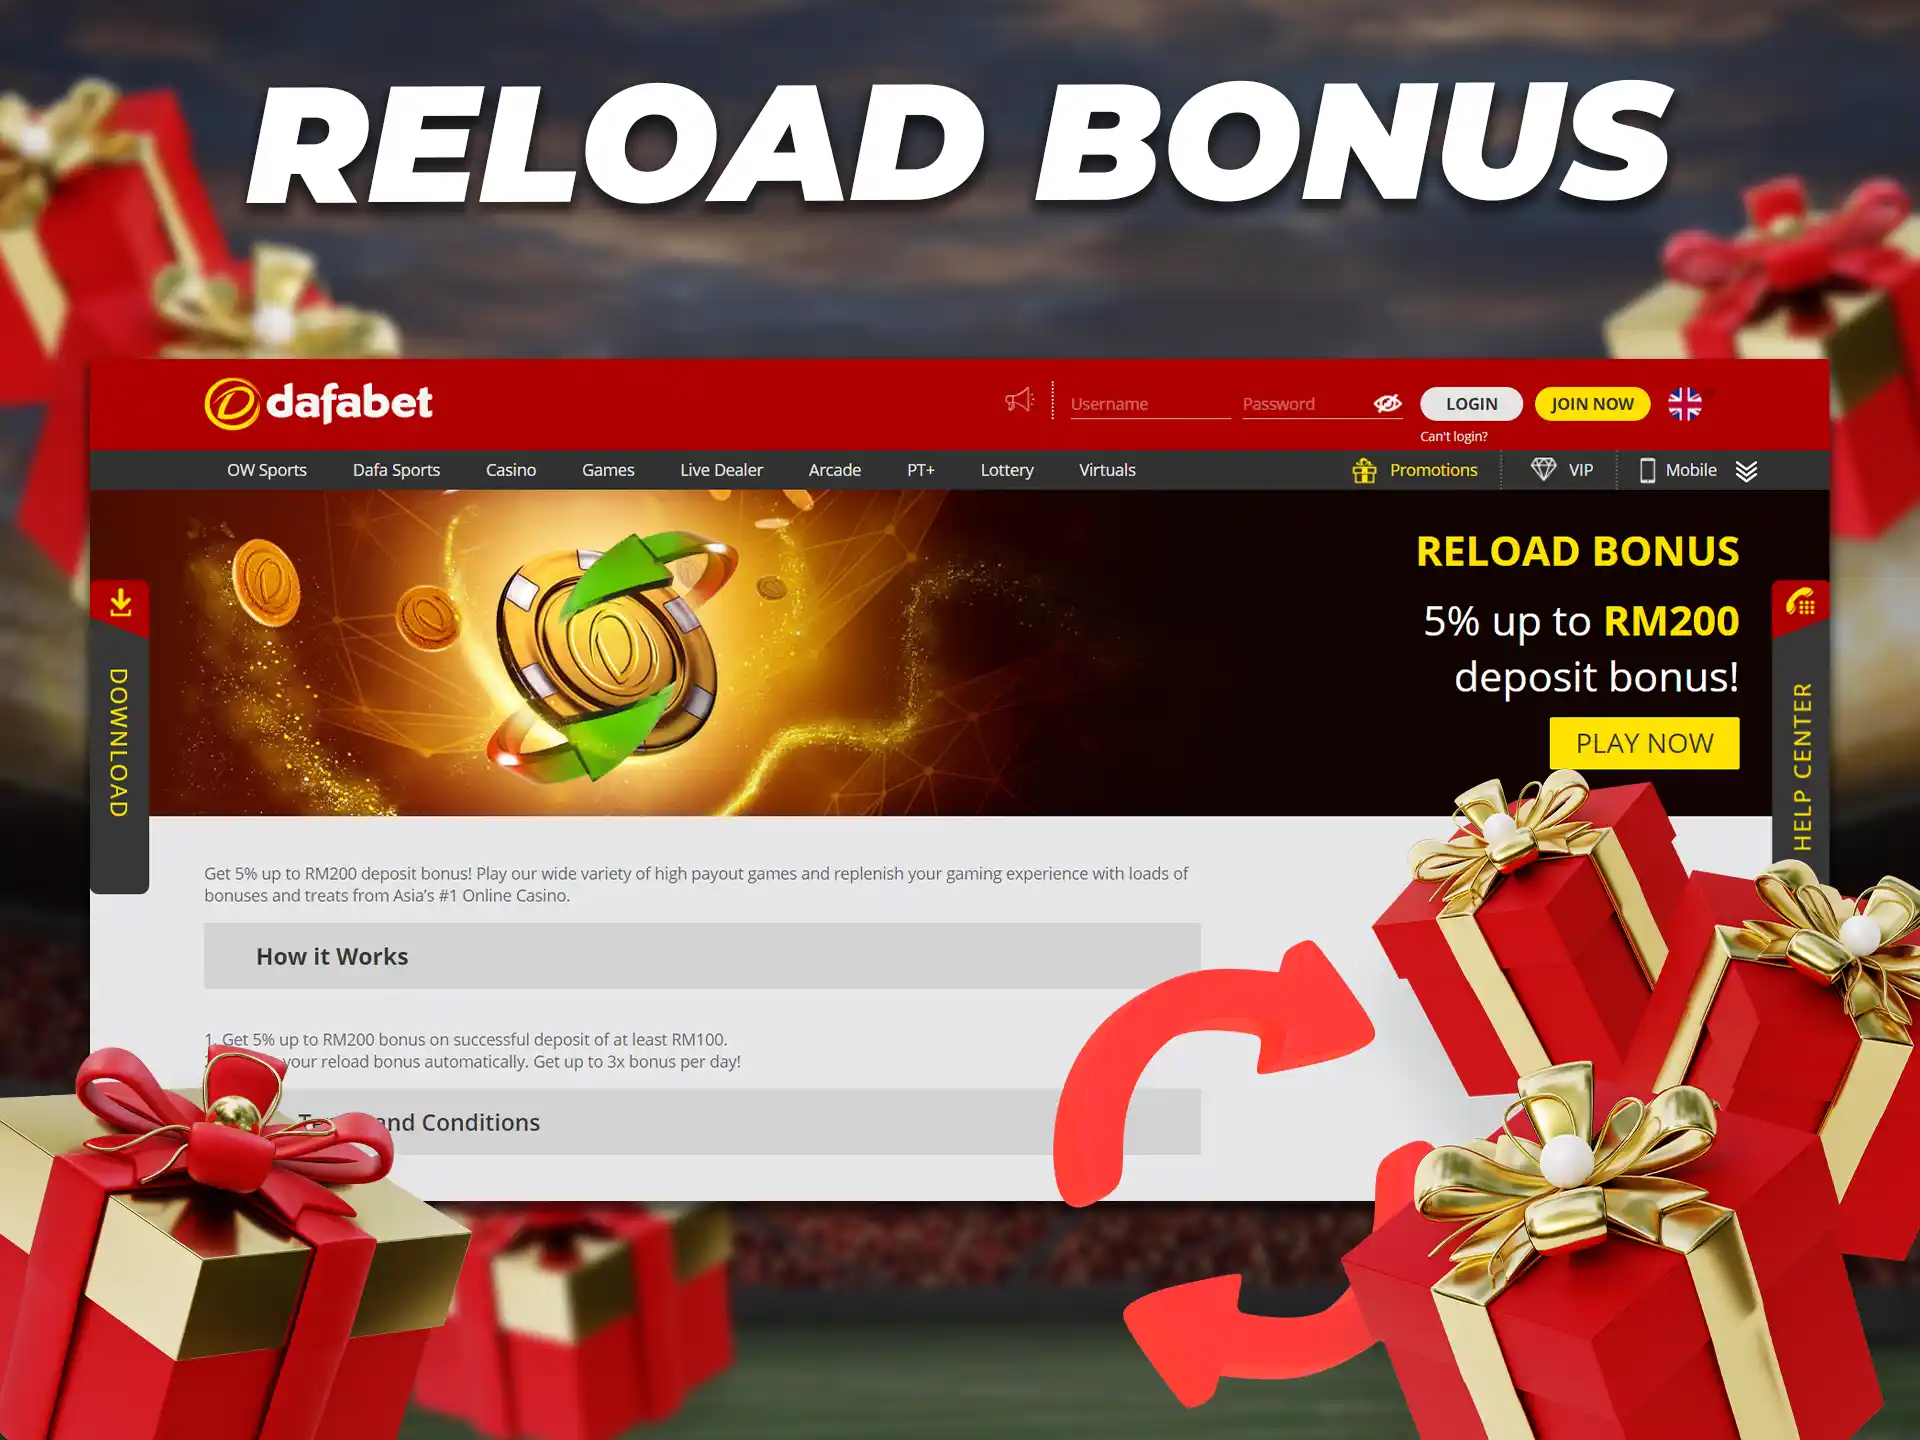 Reload bonuses are popular among betting sites and gives players the opportunity to get extra funds.